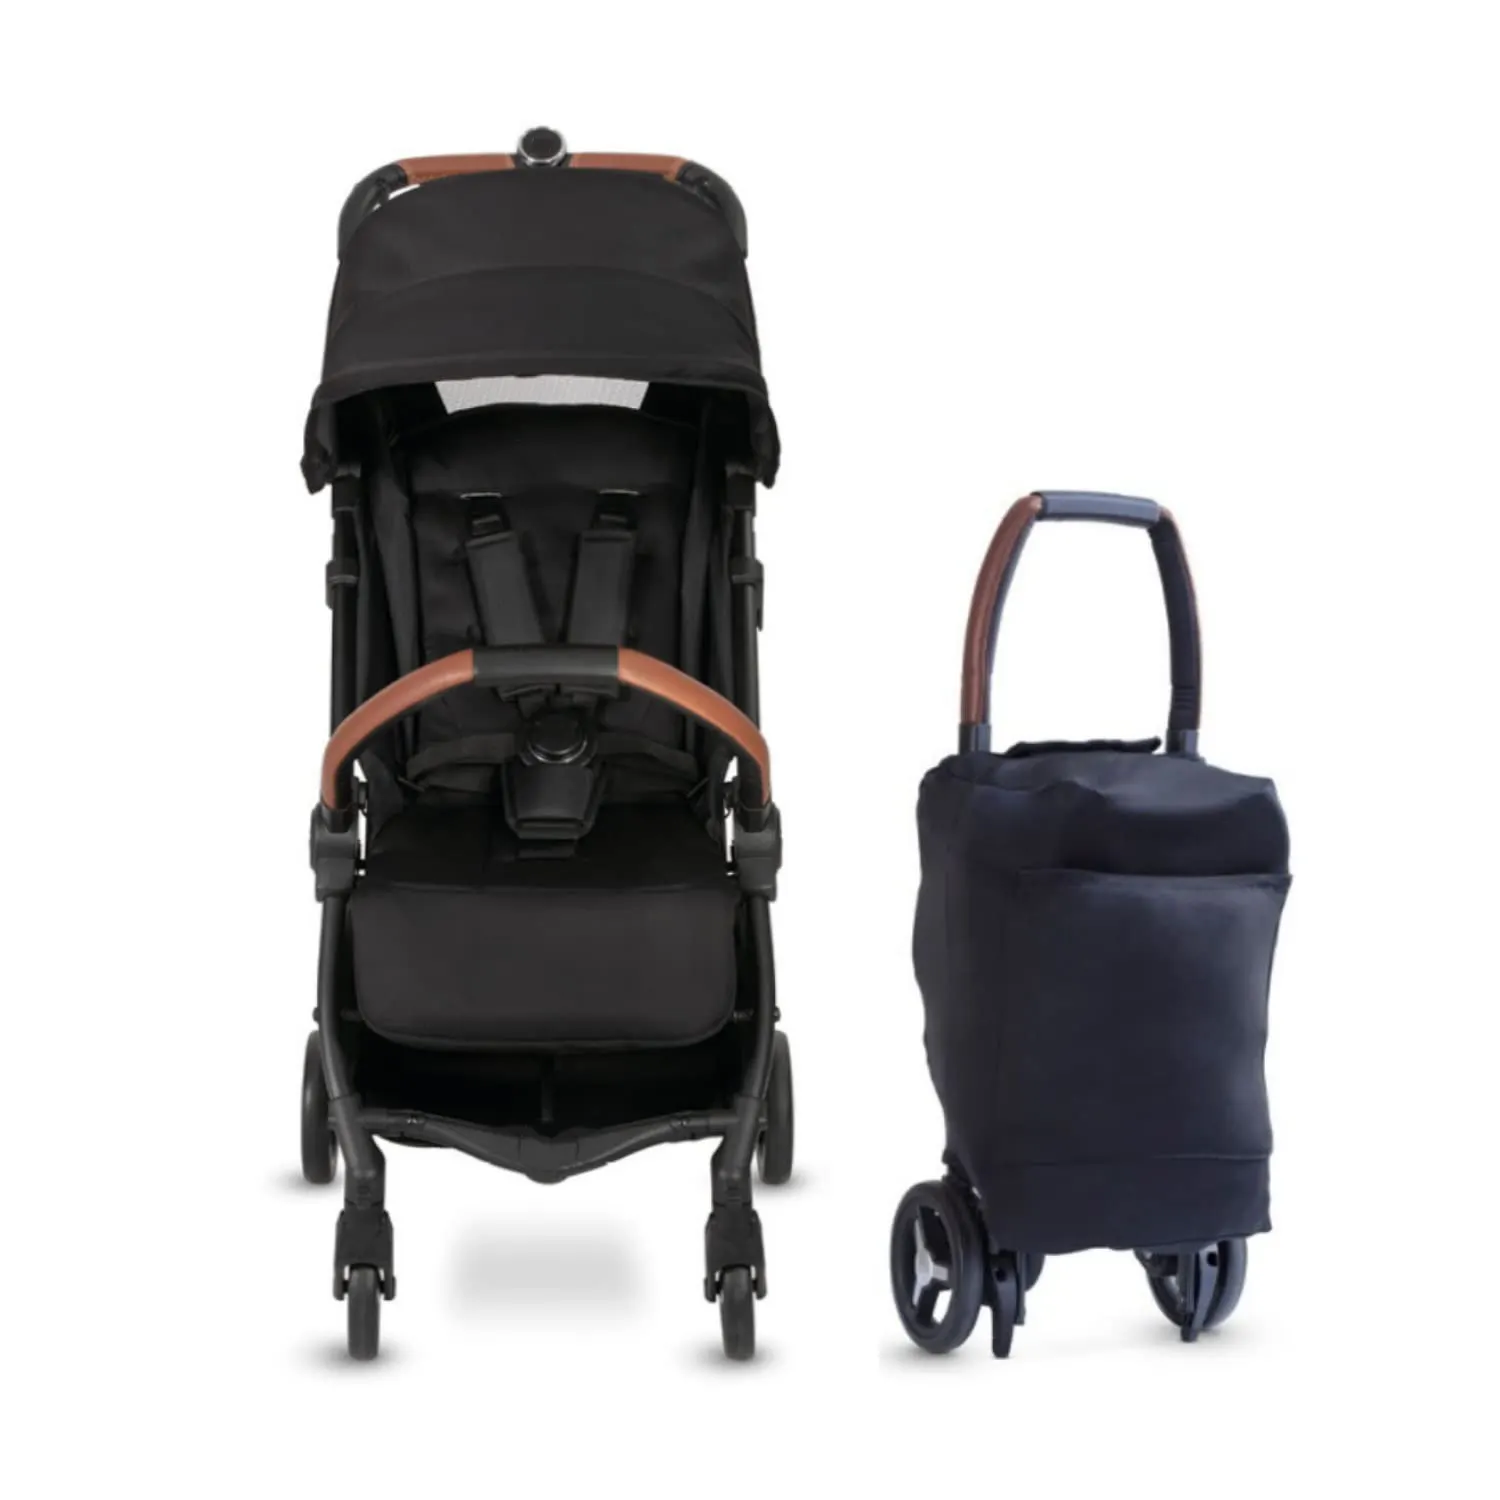 Multifunction Light Weight Baby Stroller 2 IN 1 function baby stroller Factory baby strollers for large kid Unique high views at